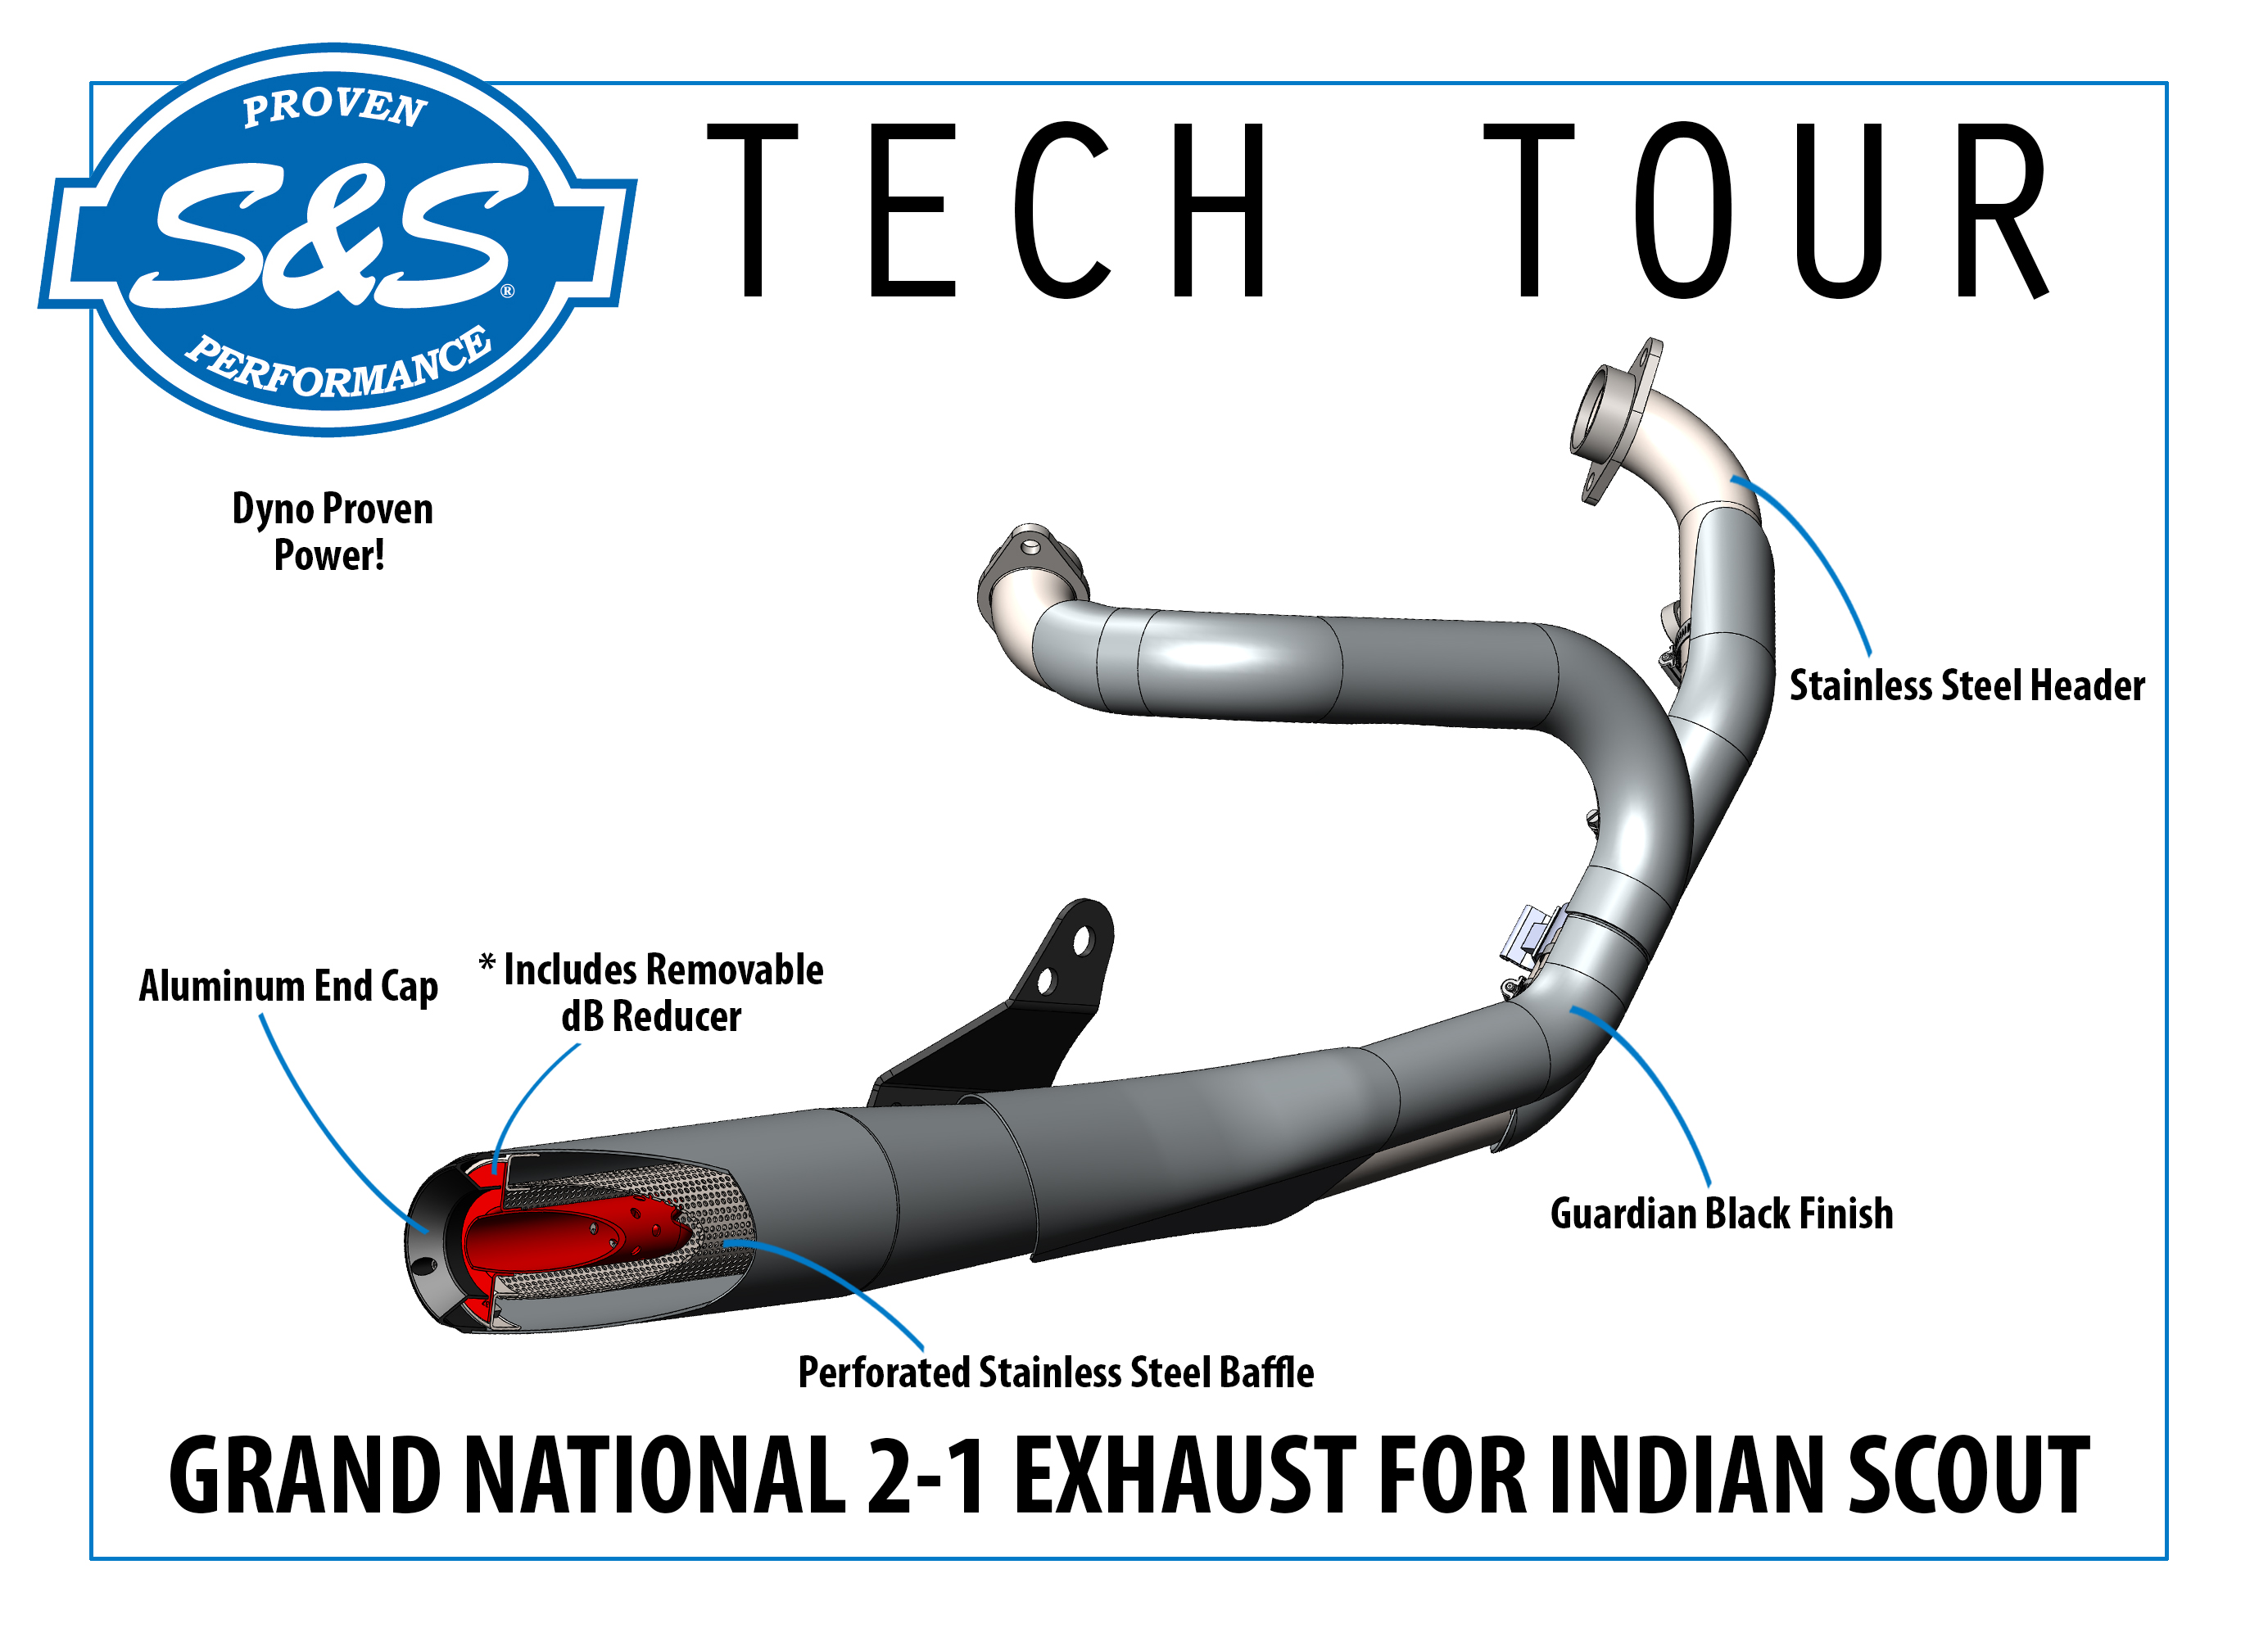 S&S Tech Tour - Indian Scout Grand National 2-1